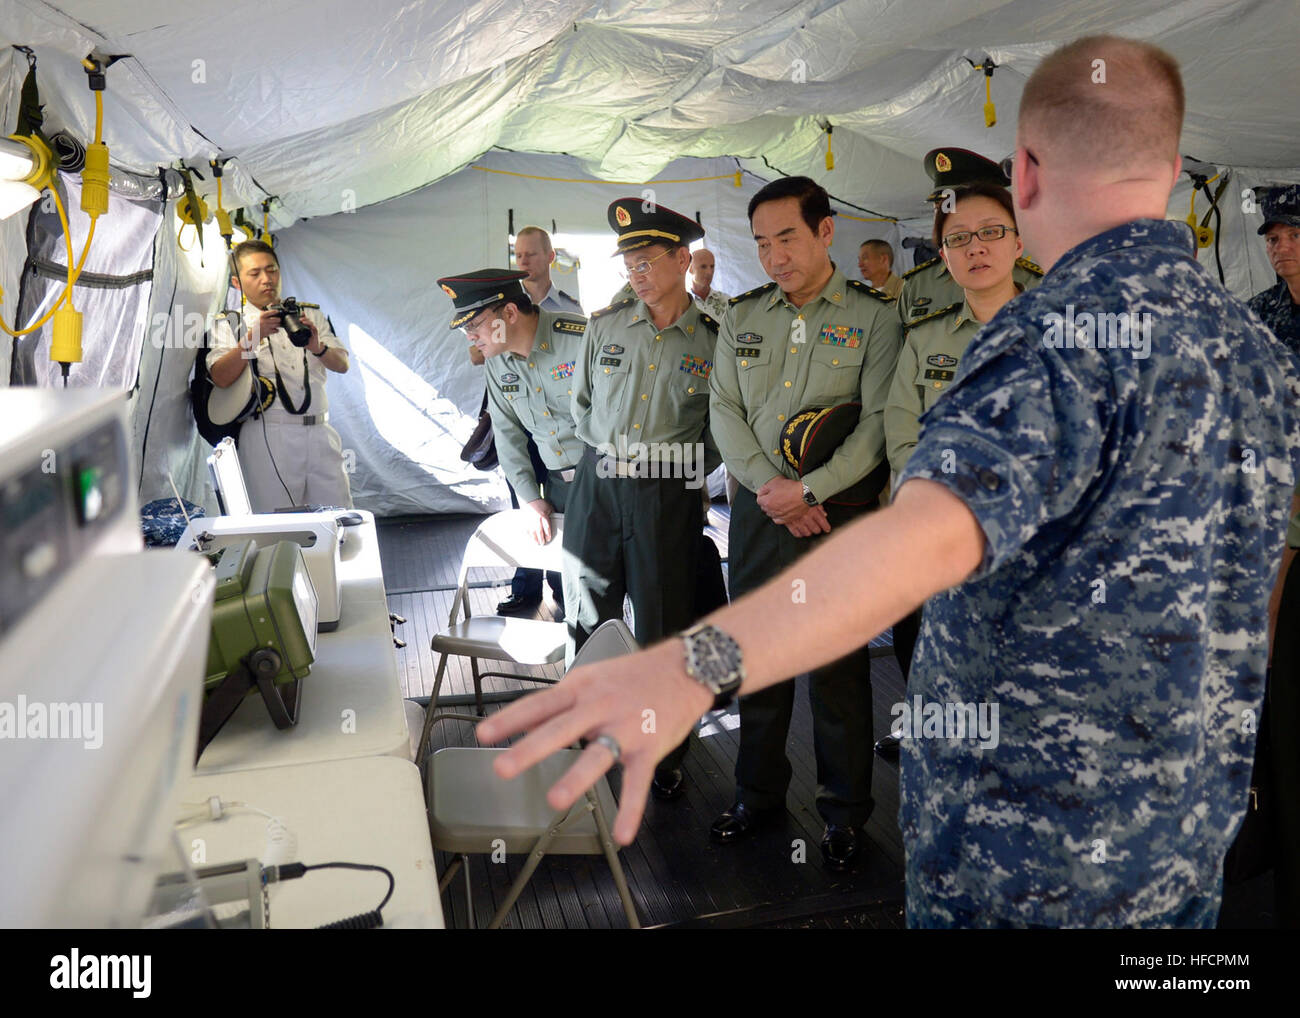 140311-N-DX698-262 JOINT BASE PEARL HARBOR HICKAM (March 11, 2014) Lt. Cmdr. Nicholas Schnauter assigned to Navy Environmental and Preventive Medicine Unit Six (NEPMU-6) explains a microbiology system to a People's Liberation Army (PLA) Senior Medical Delegation Strategic Working Group. The PLA Senior Medical Delegation is visiting PACOM to discuss engagement between the US and PLA Navy hospital ships, medical institutional and educational exchanges and to enhance U.S. and People's Republic of China cooperation within the Asia-Pacific region. (U.S. Navy photo by Mass Communication Specialist 1 Stock Photo